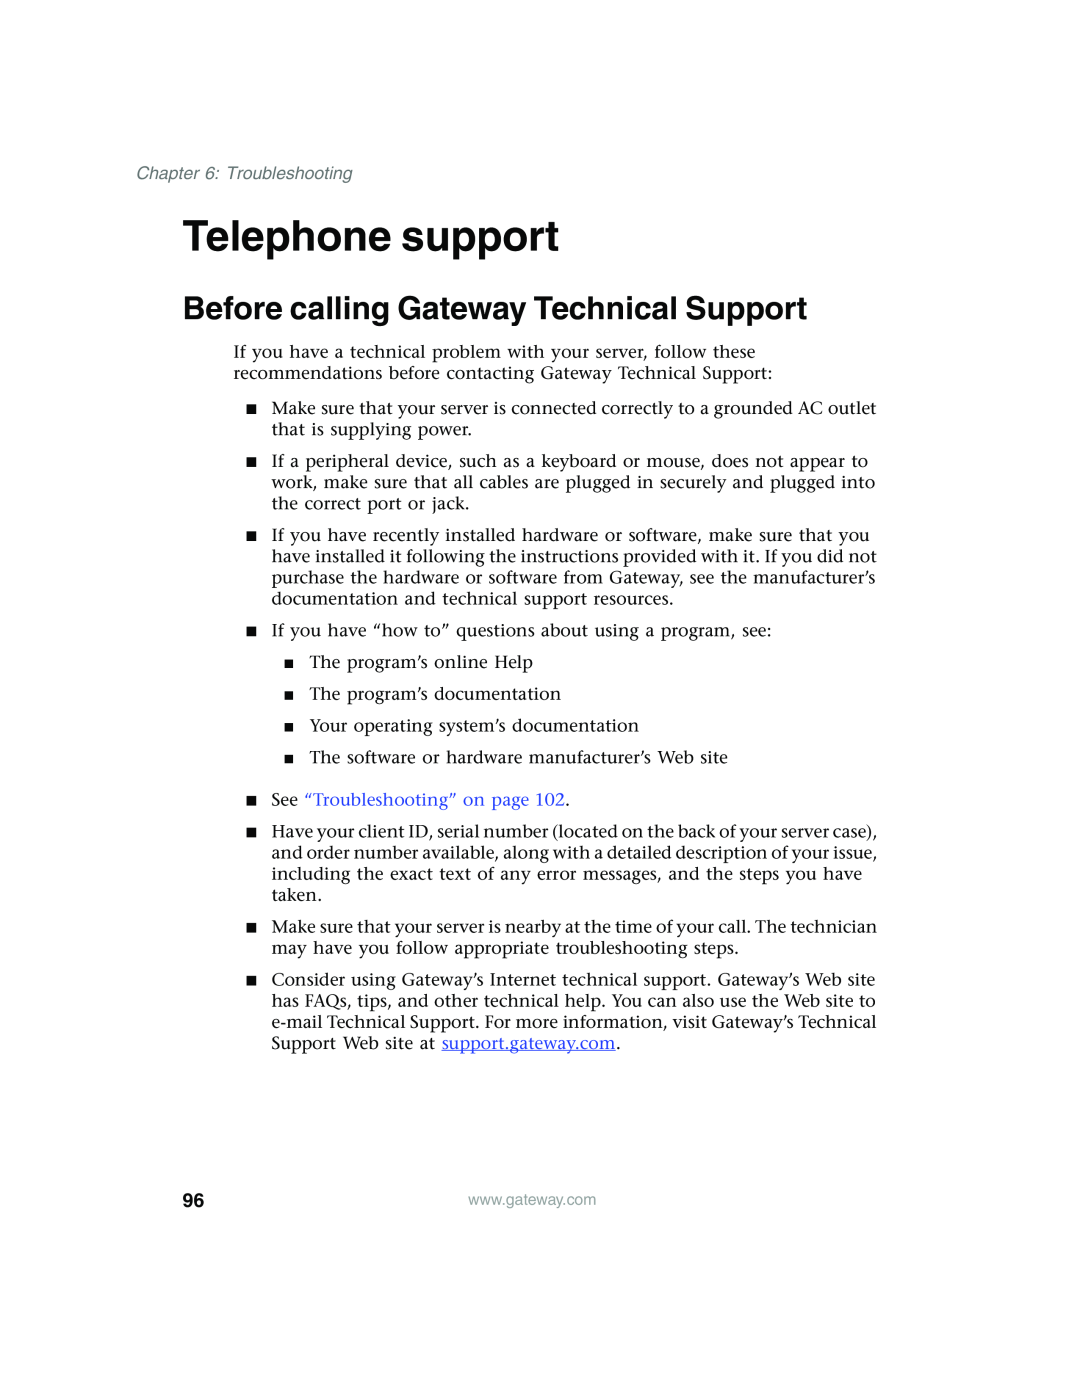 Gateway 955 manual Telephone support, Before calling Gateway Technical Support, See “Troubleshooting” on page 